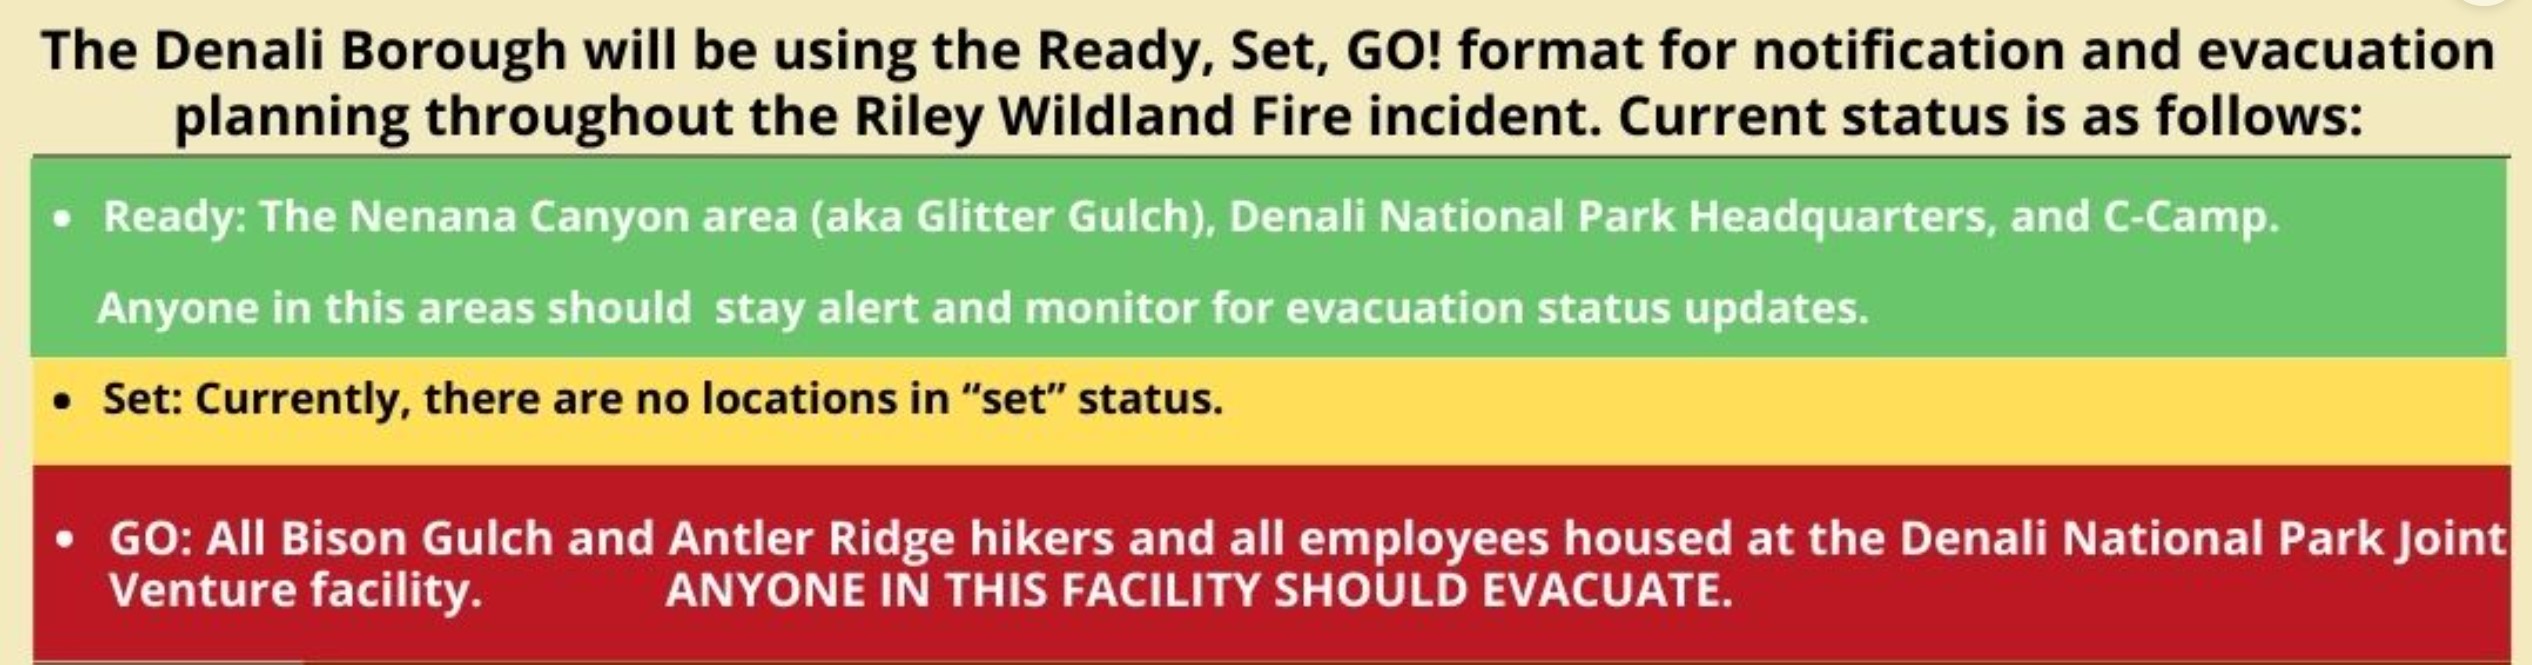 Image displays three levels of wildland fire evacuation preparedness: Ready (Green), Set (Yellow), and GO! (Red).